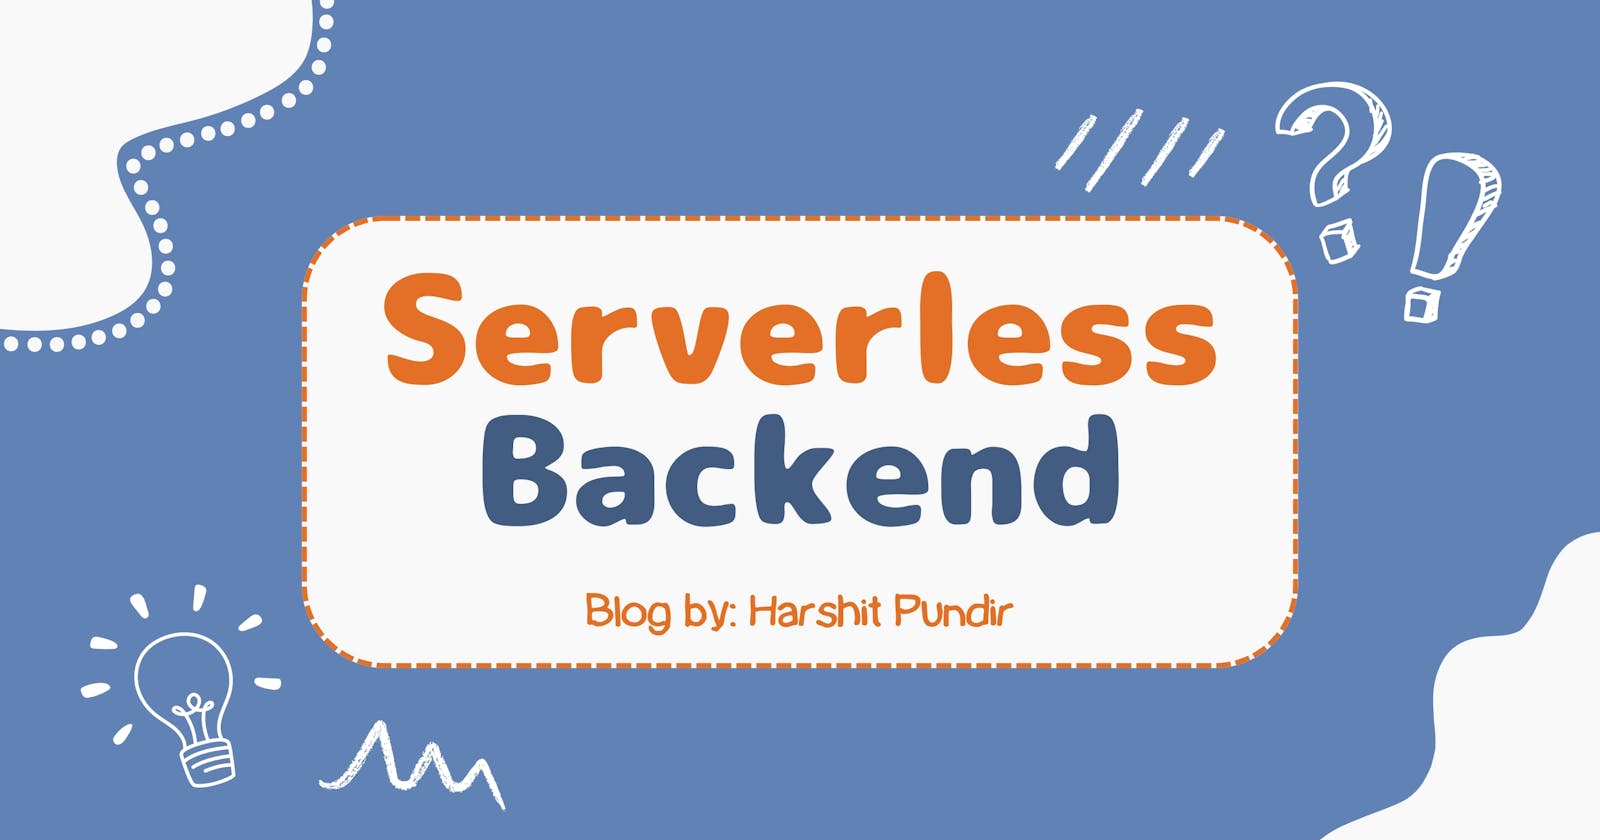 Serverless Architecture for Backend